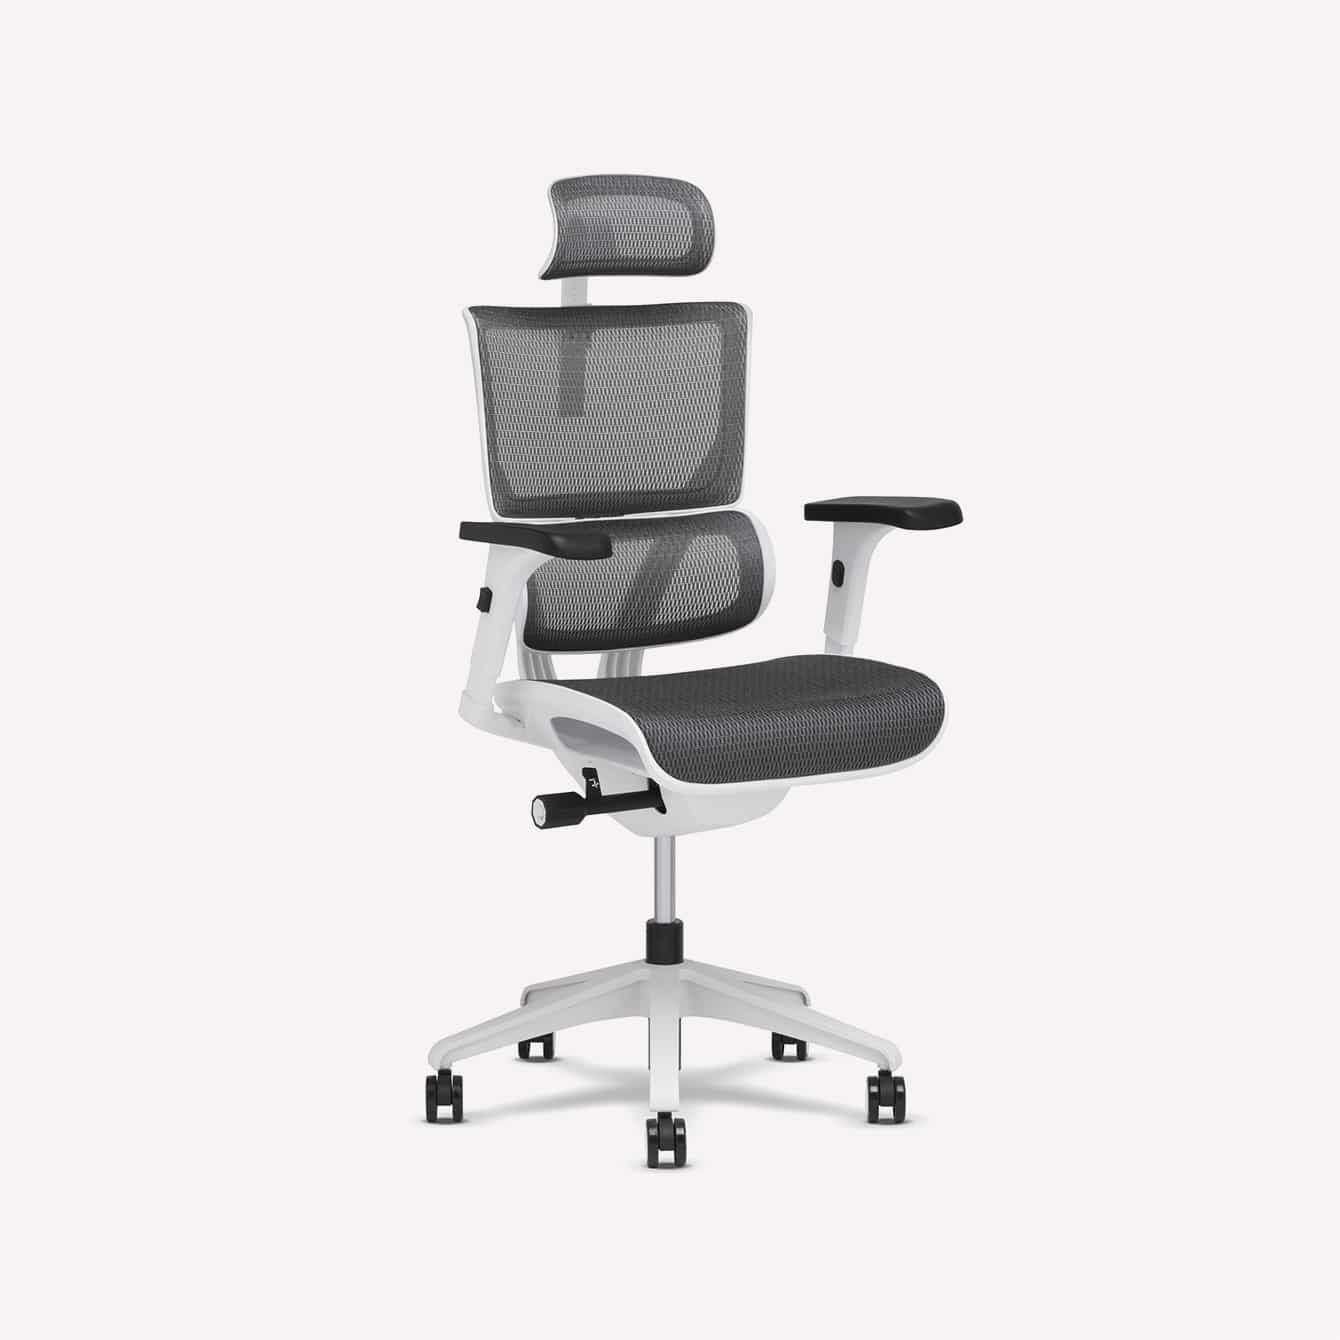 7 MAJOR Problems Finding Ergonomic Chairs for Petite People